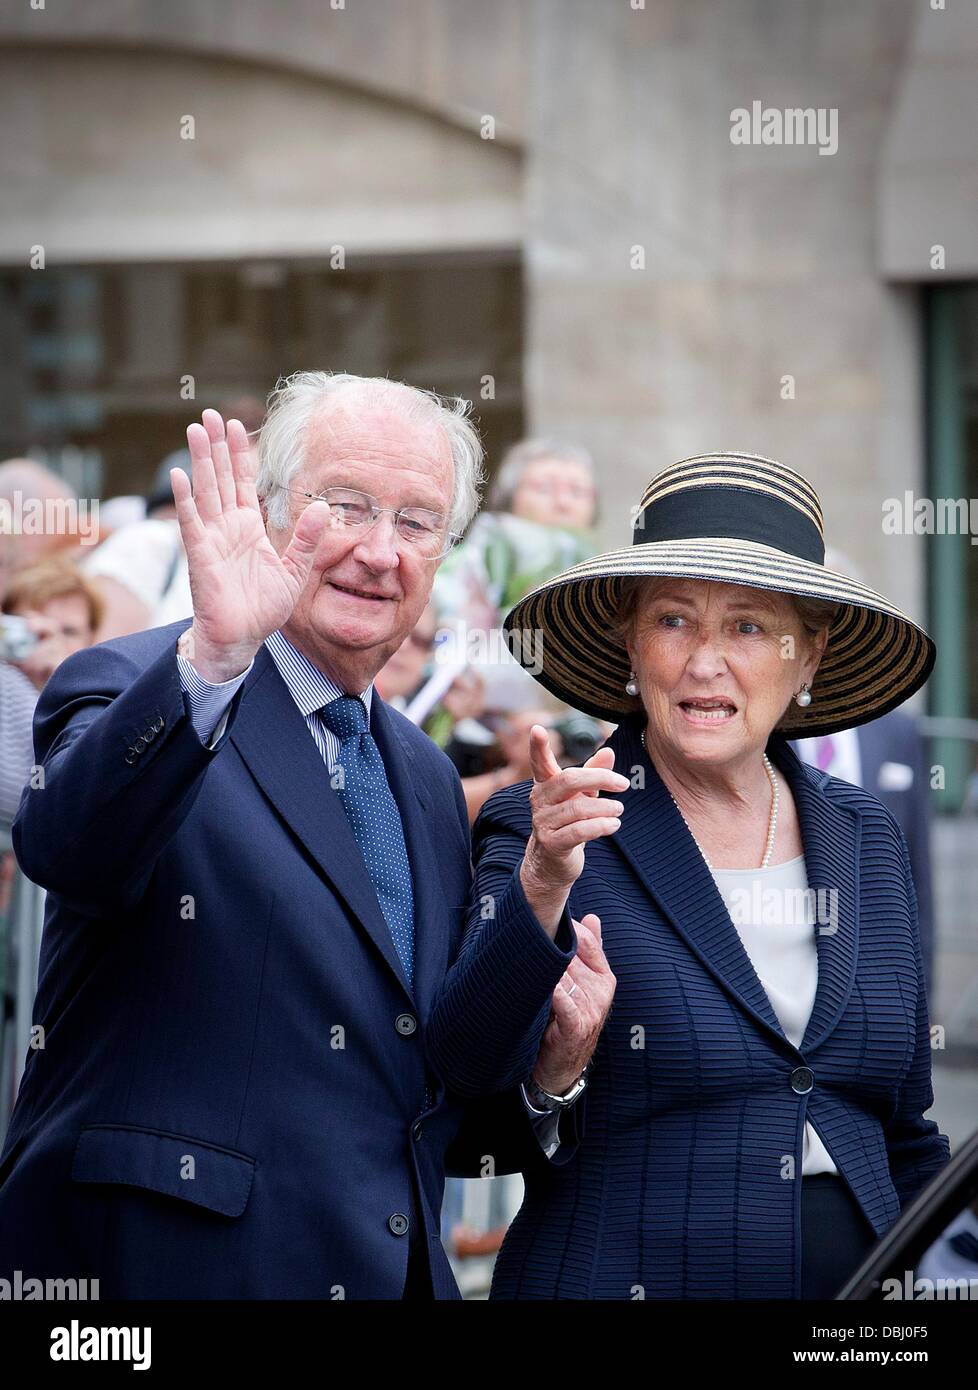 Brussels, Belgium. 31st July, 2013. King Albert and Queen Paola of Belgium attend the mass to commemorate the death of King Baudouin 20 years ago at the Cathedral in Brussels, Belgium, 31 July 2013. Photo: Patrick van Katwijk/dpa/Alamy Live News Stock Photo